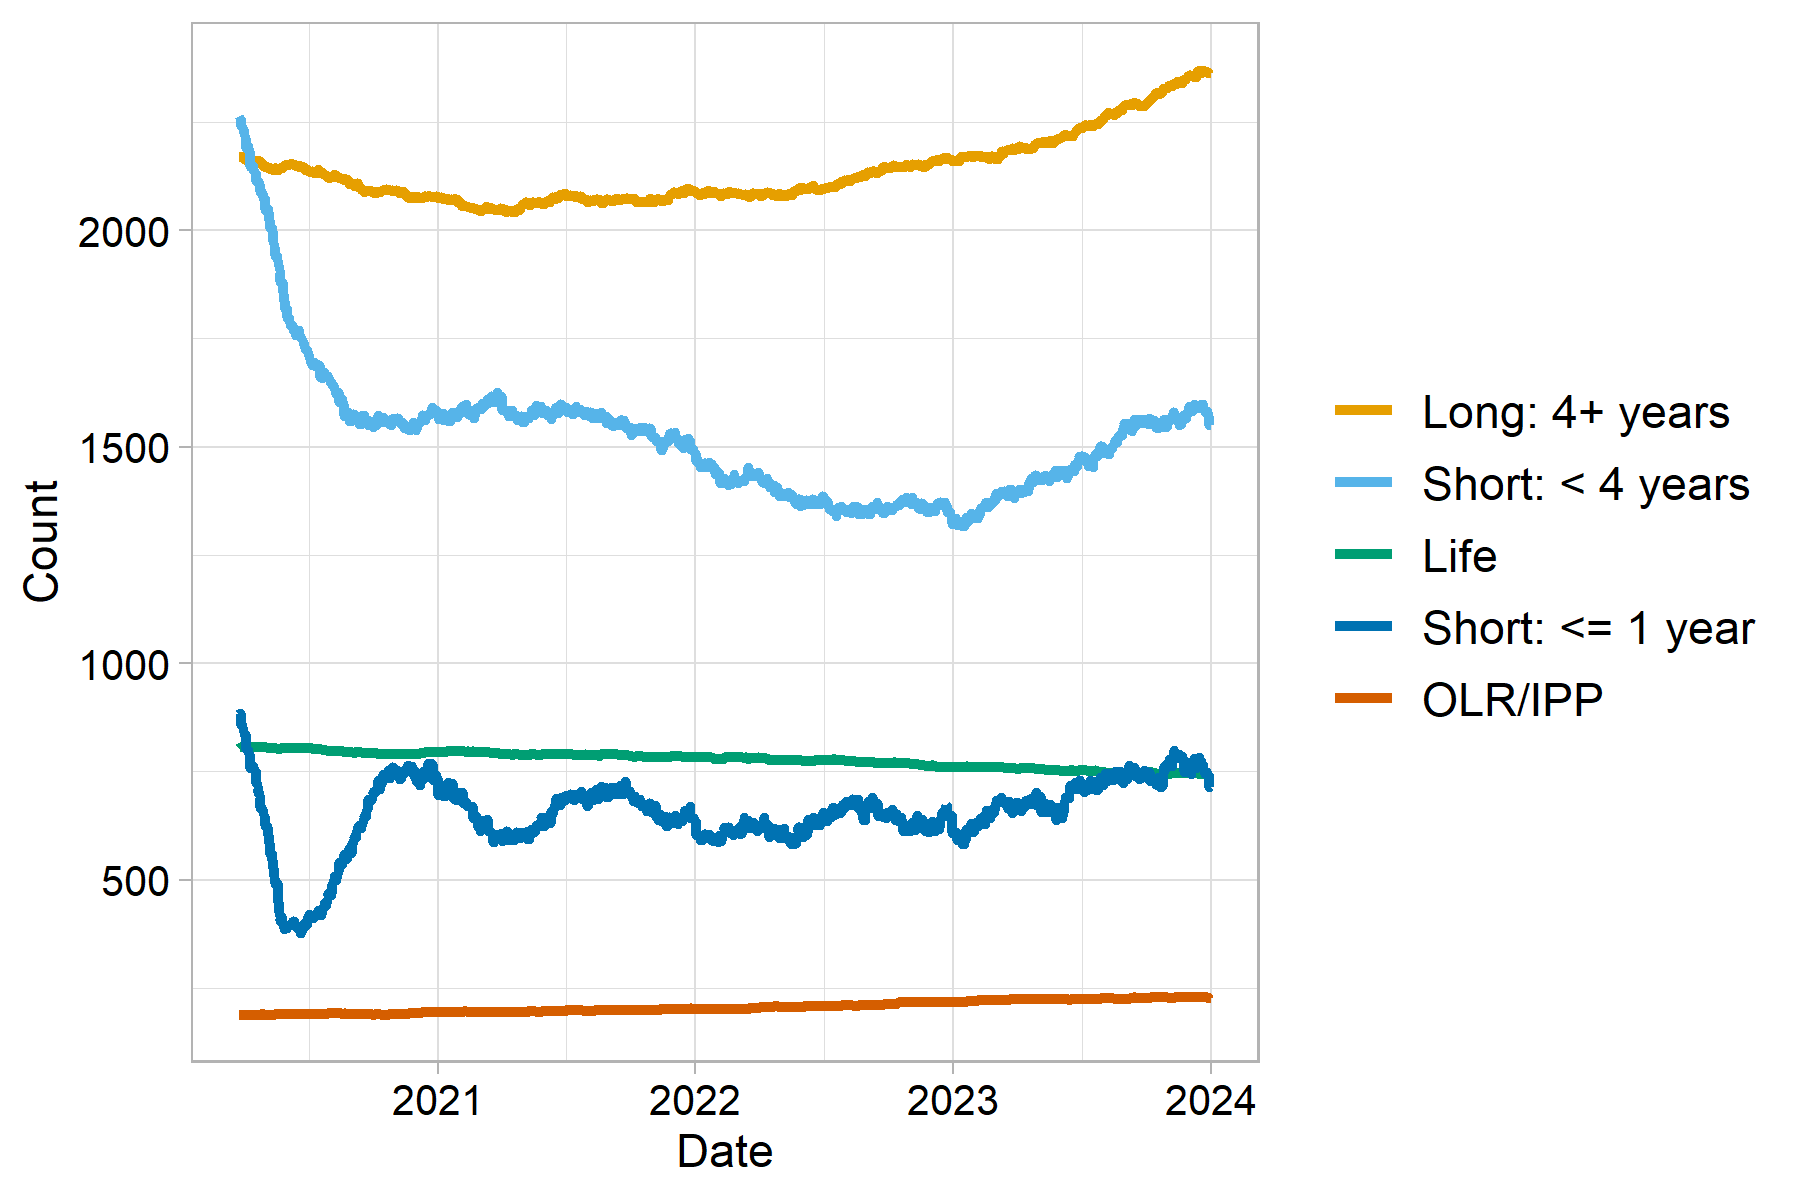 The sentenced population broken into overall sentence bands. The highest line to lowest line categories Long: 4 years plus (highest line), Short: less that 4 years, Life, Short: one year or less, Orders of Lifelong Restriction (lowest line). The trends are described in the body text. Last updated January 2024. Next update due February 2024.